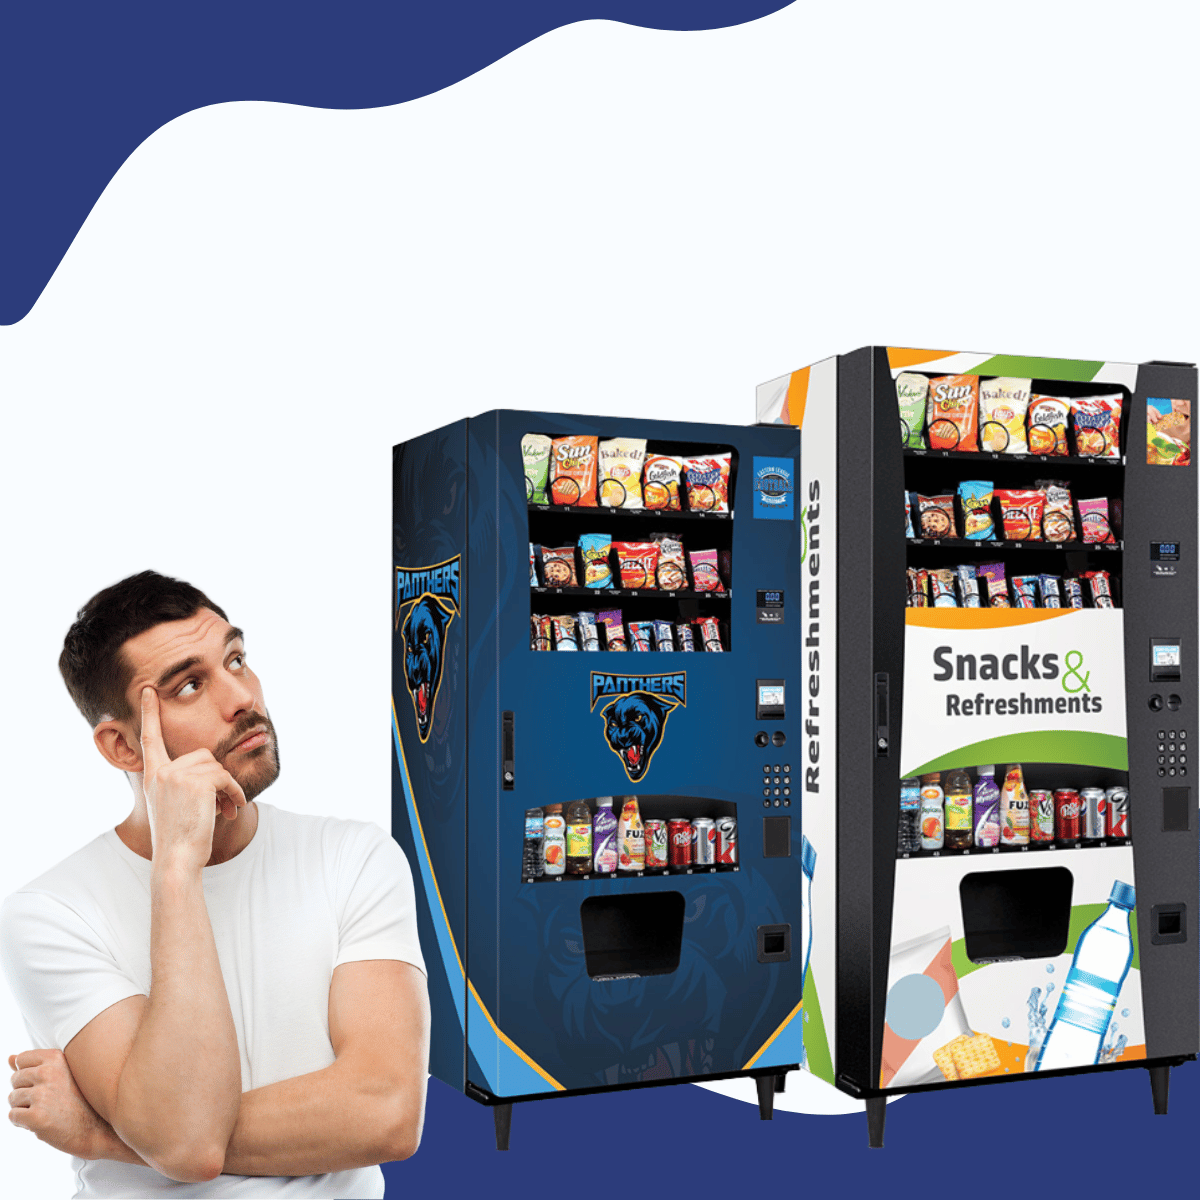 ARE YOU THINKING ABOUT STARTING A VENDING MACHINE BUSINESS?